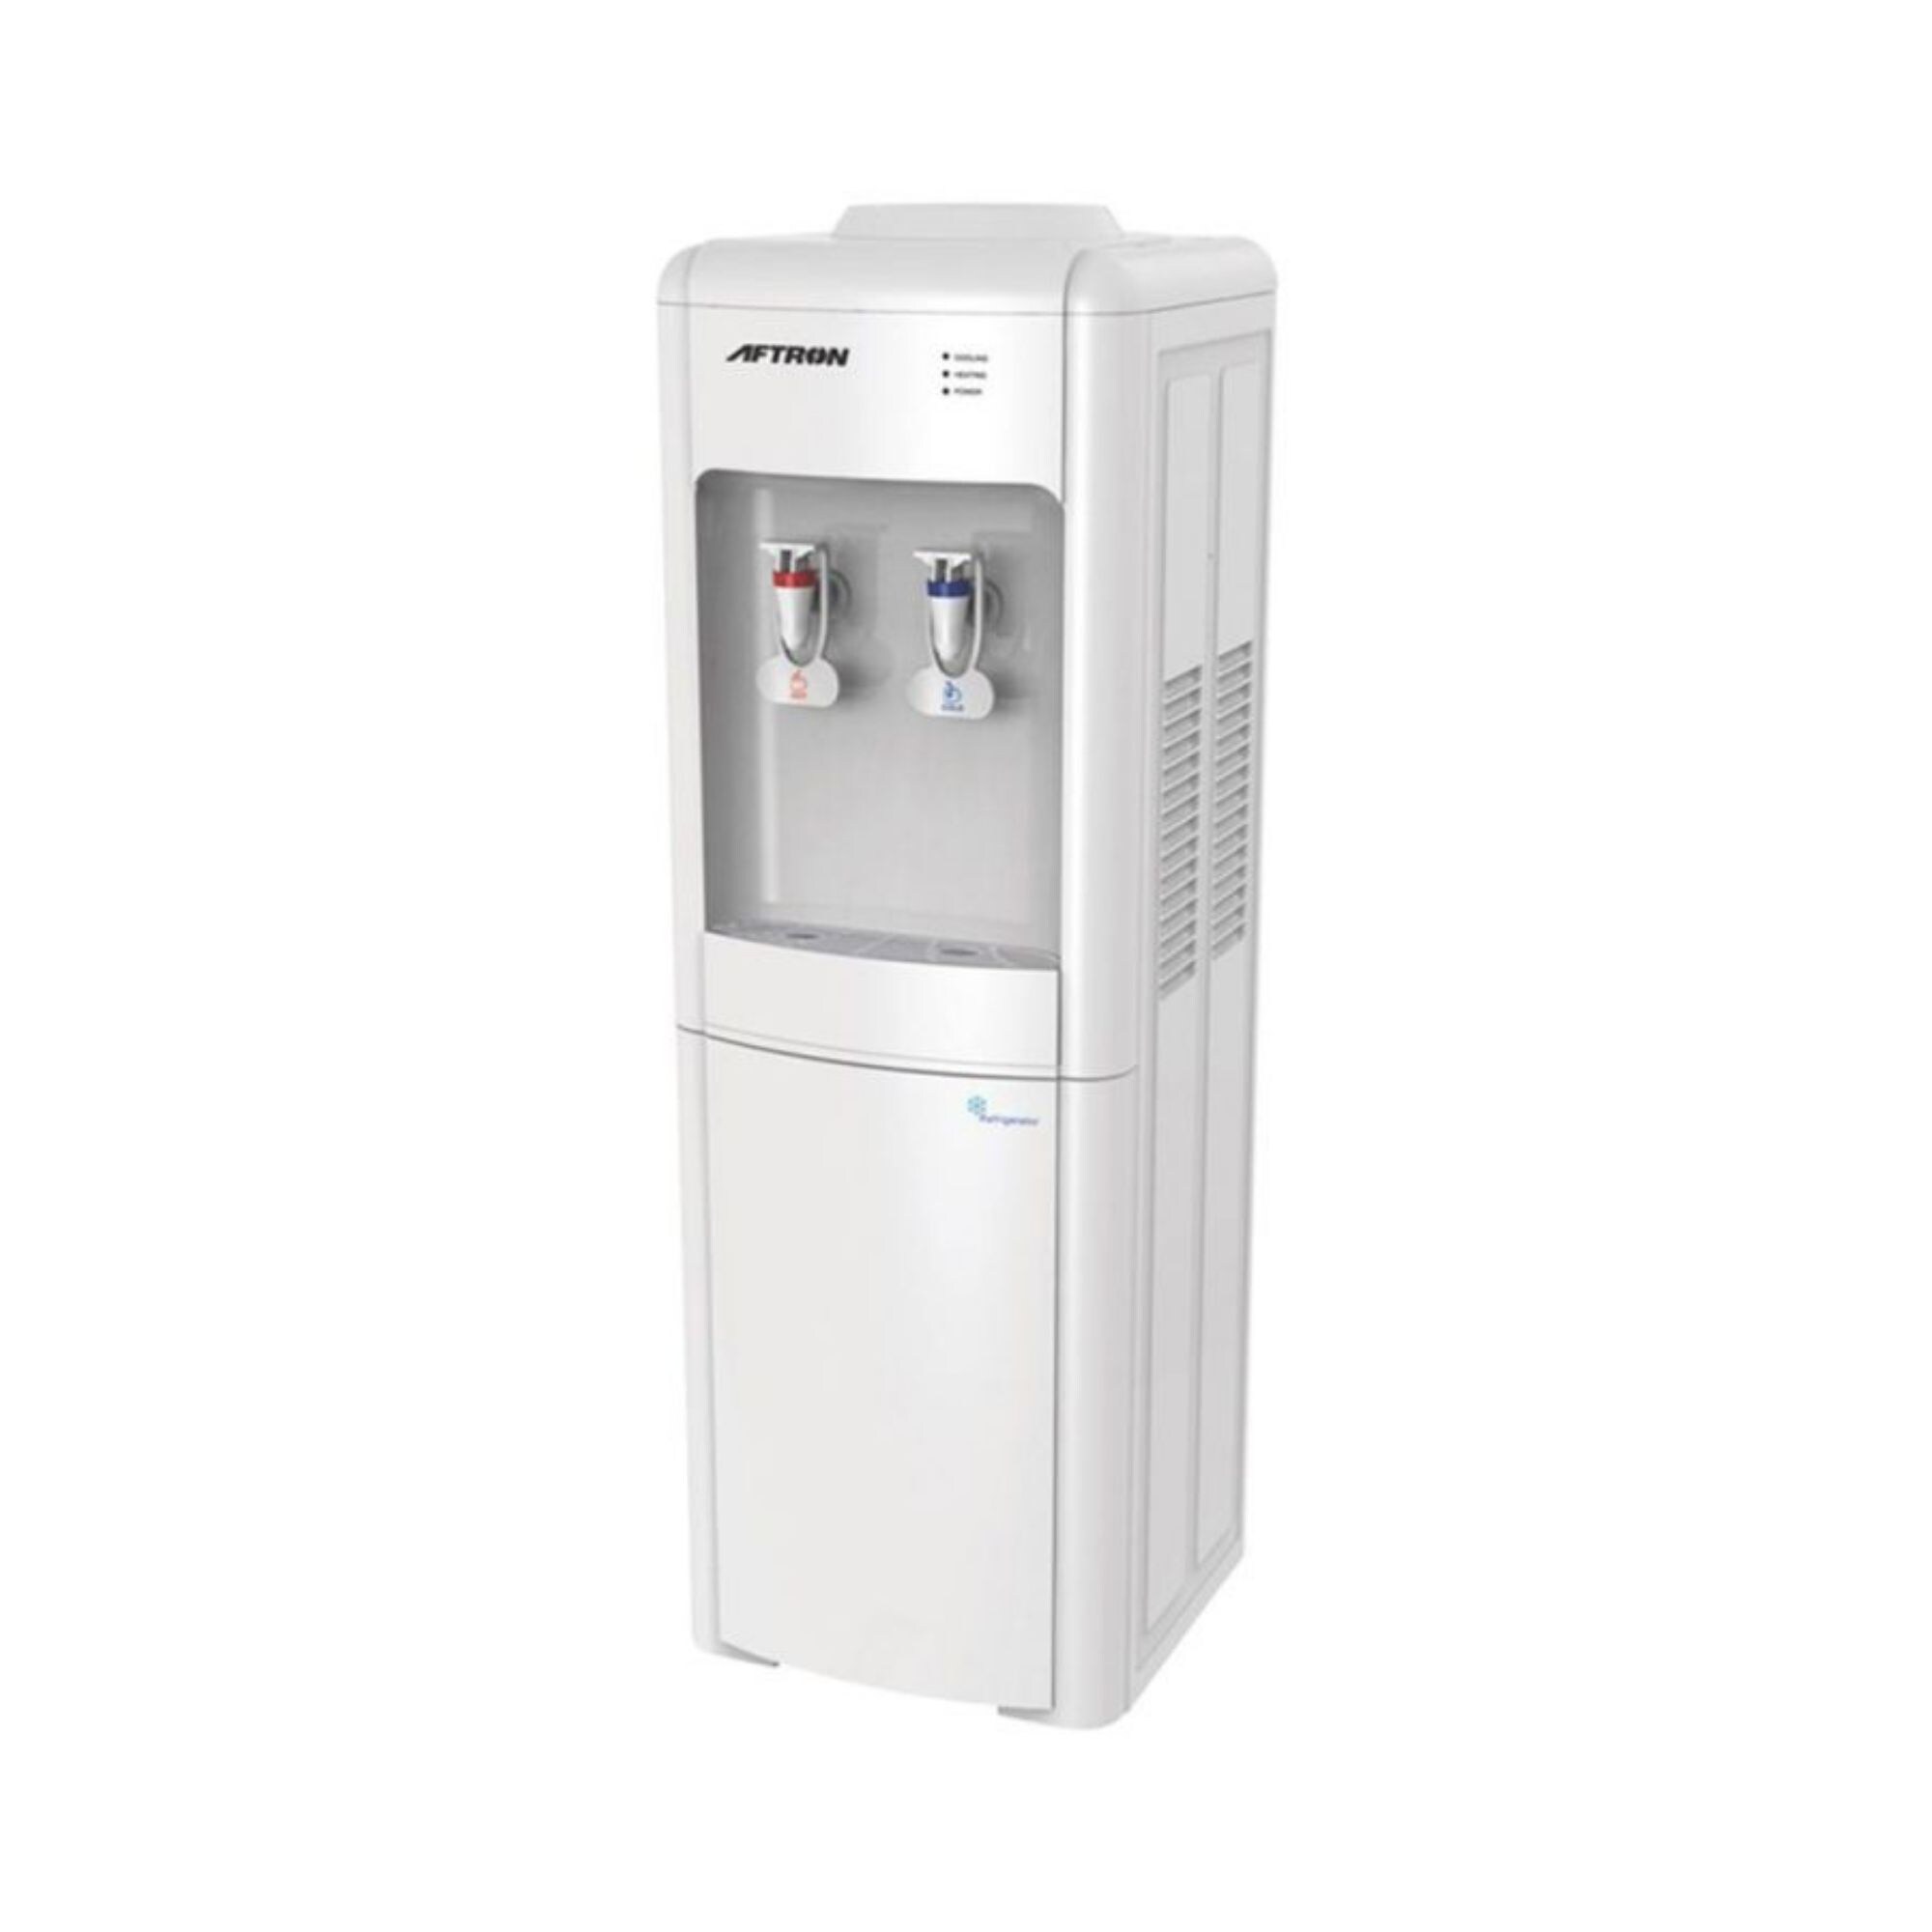 Aftron Hot and Cold Water Dispenser, White